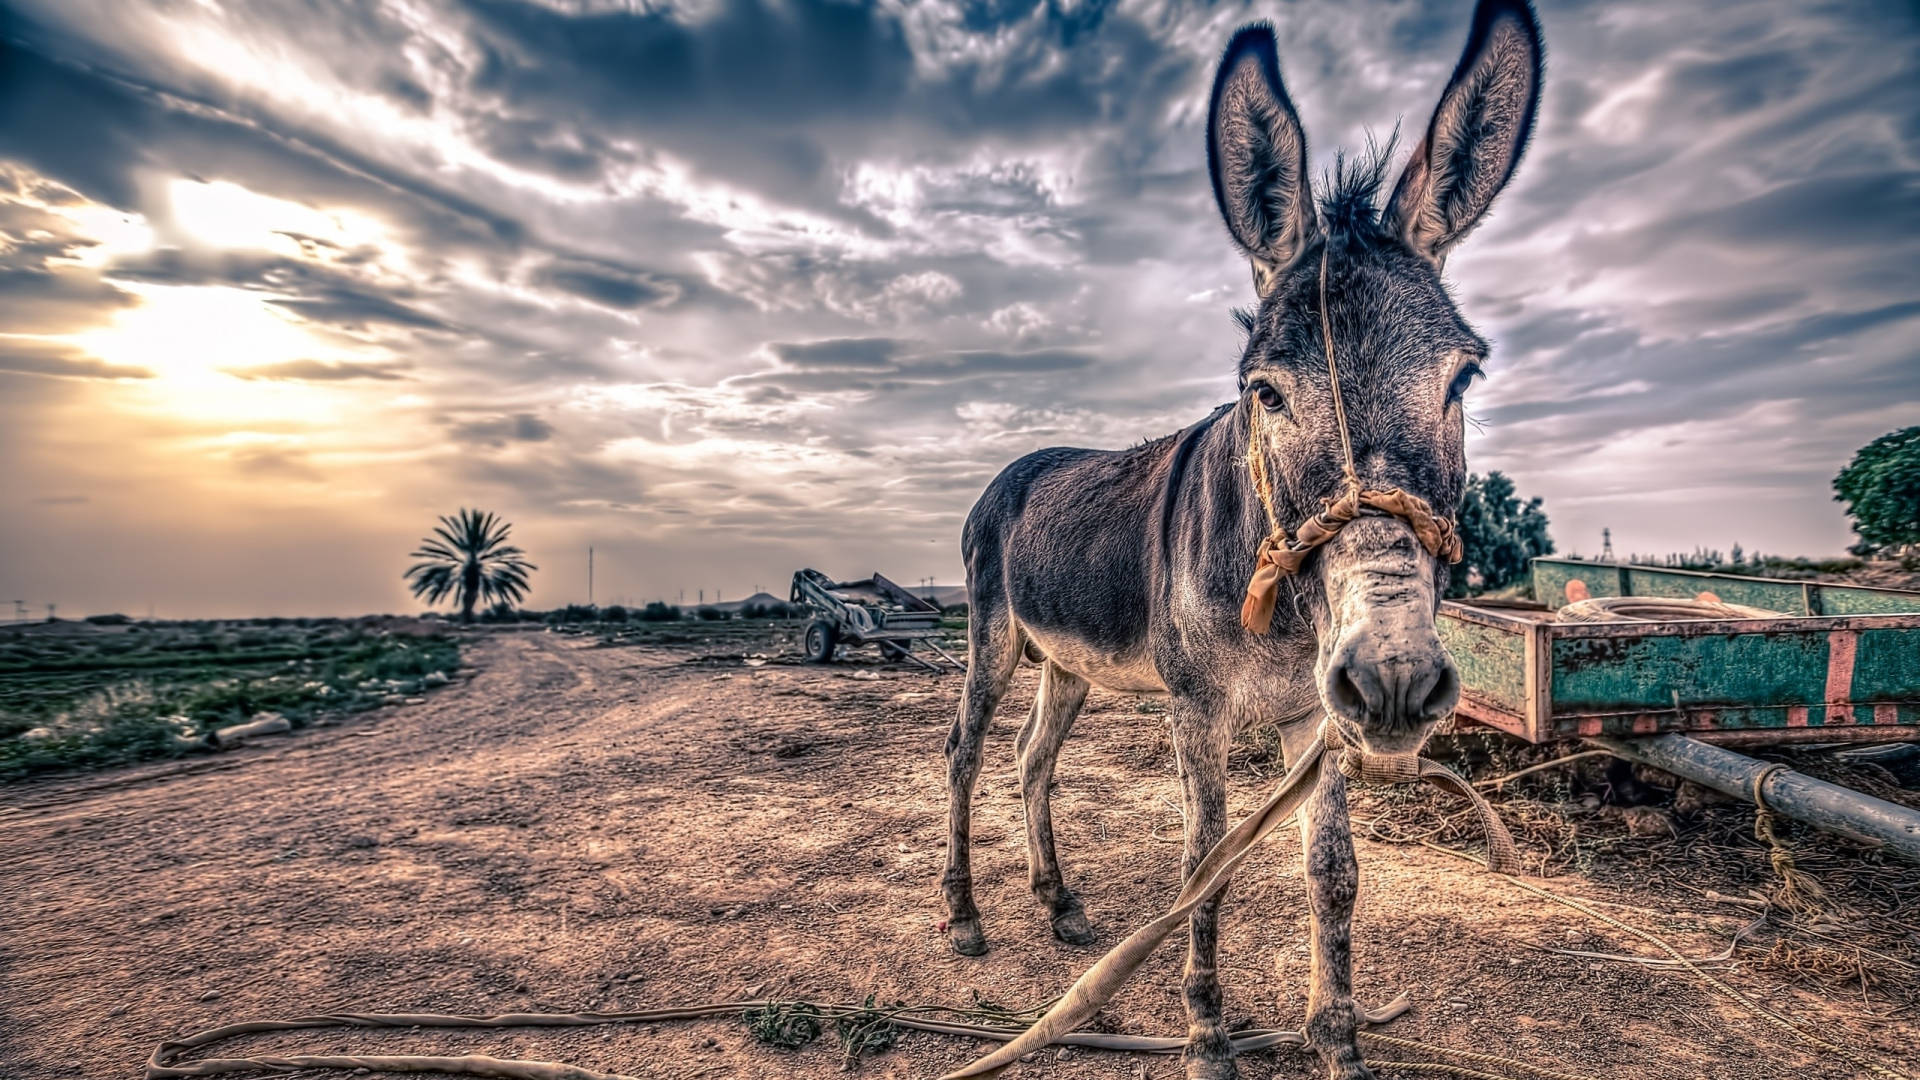 A donkey on a dirt road with a cloudy sky in the background. - Farm